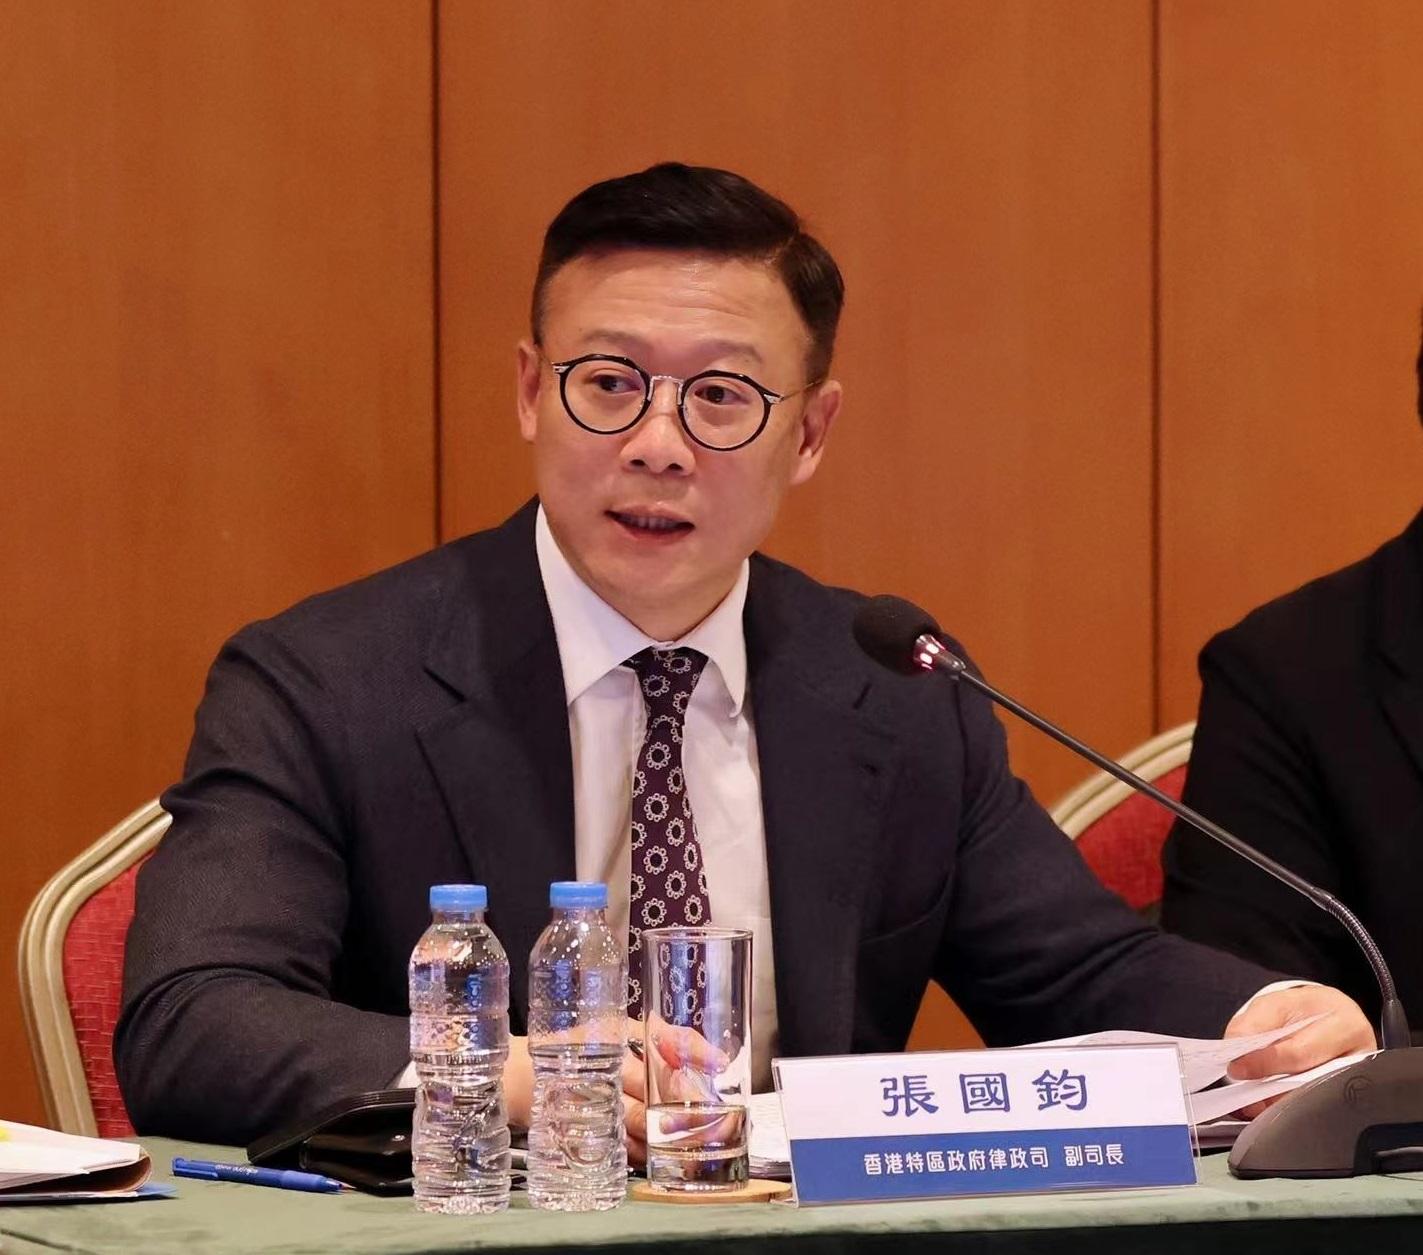 The fifth Guangdong-Hong Kong-Macao Greater Bay Area Legal Departments Joint Conference was held in Macao today (December 7). Photo shows the Deputy Secretary for Justice, Mr Cheung Kwok-kwan, speaking at the Joint Conference.

